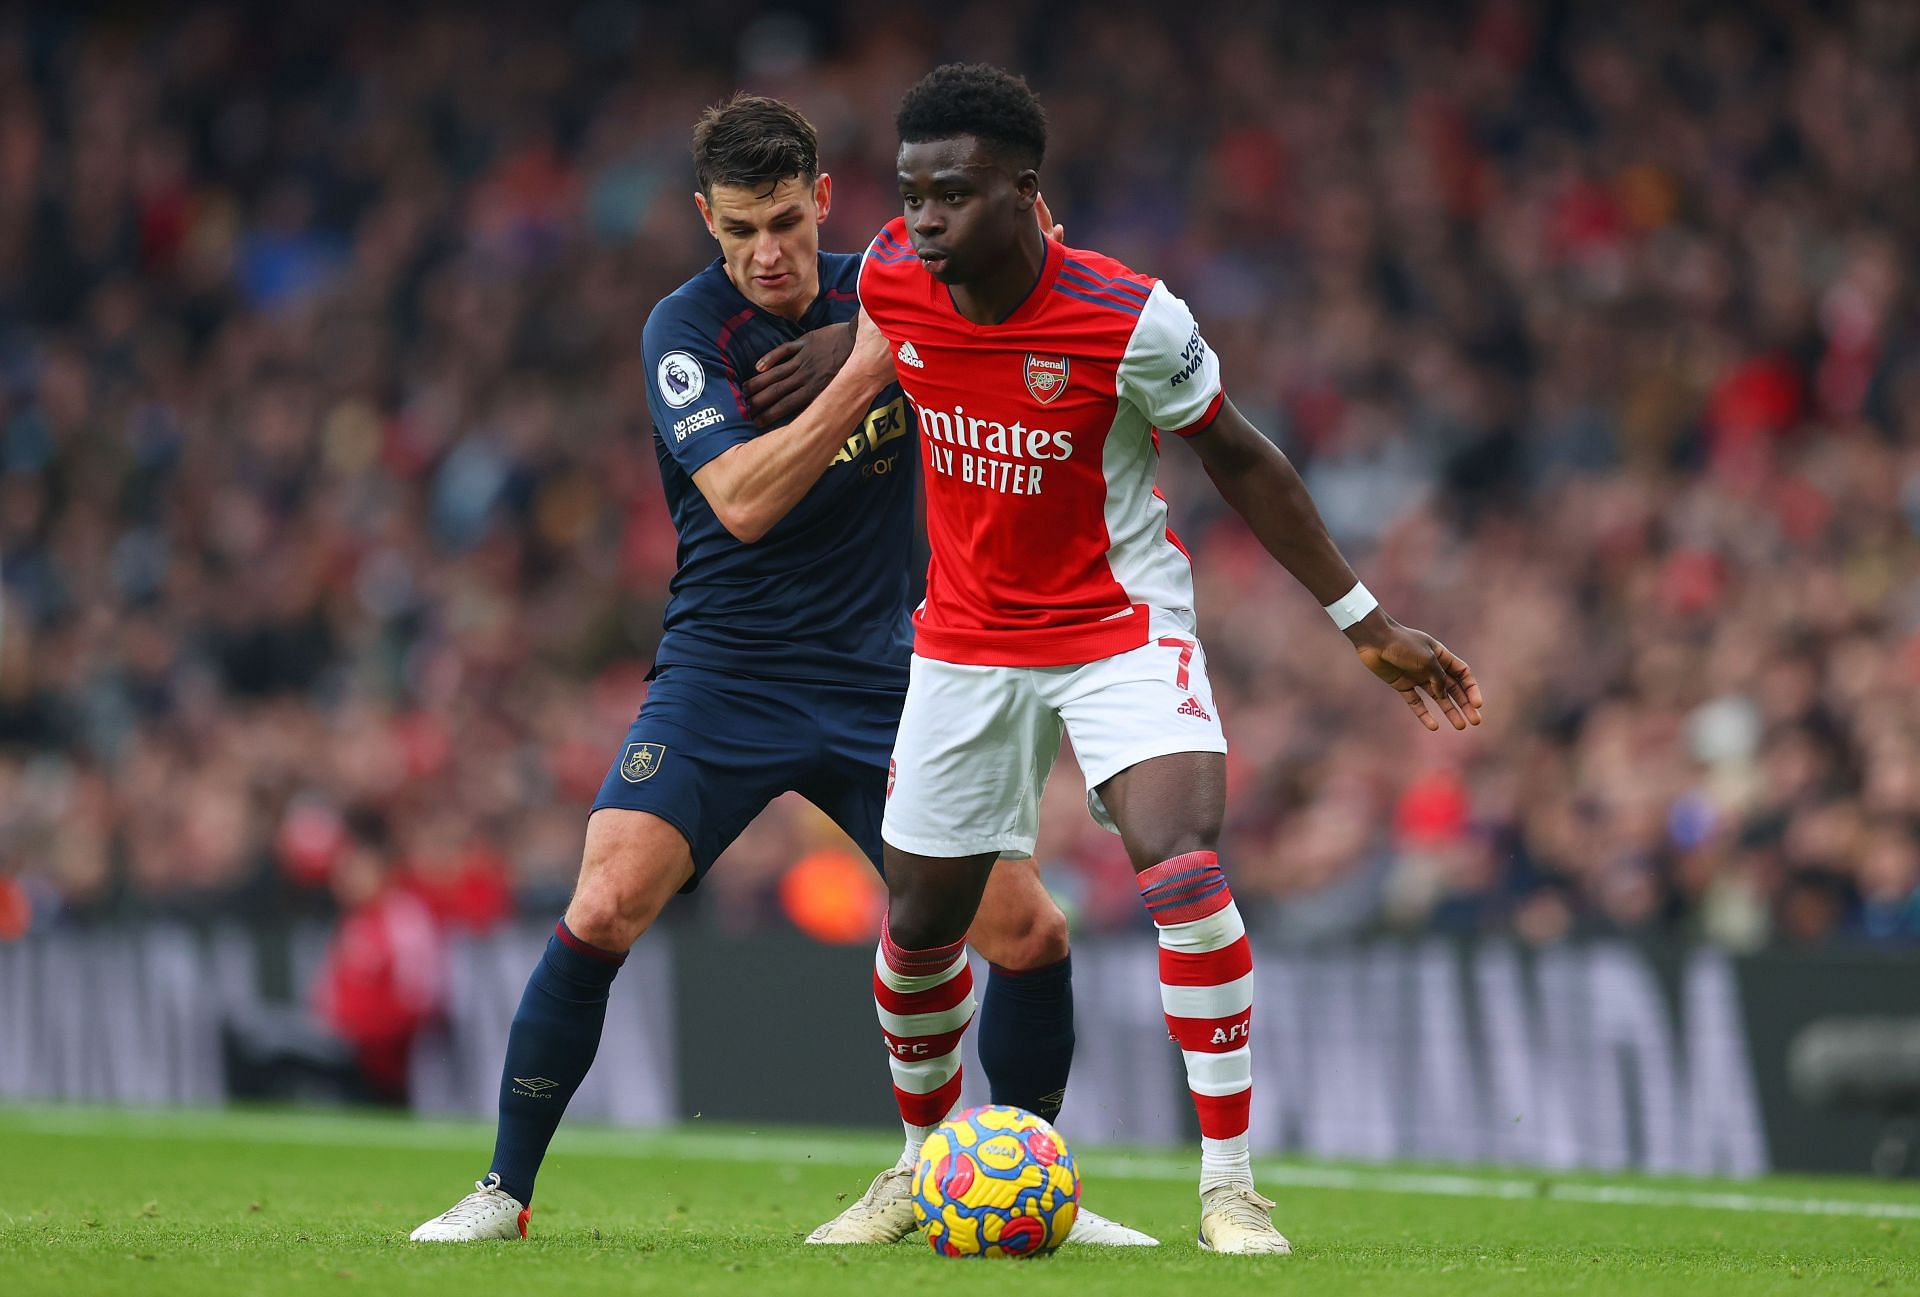 Bukayo Saka has been very productive in front of goal this season